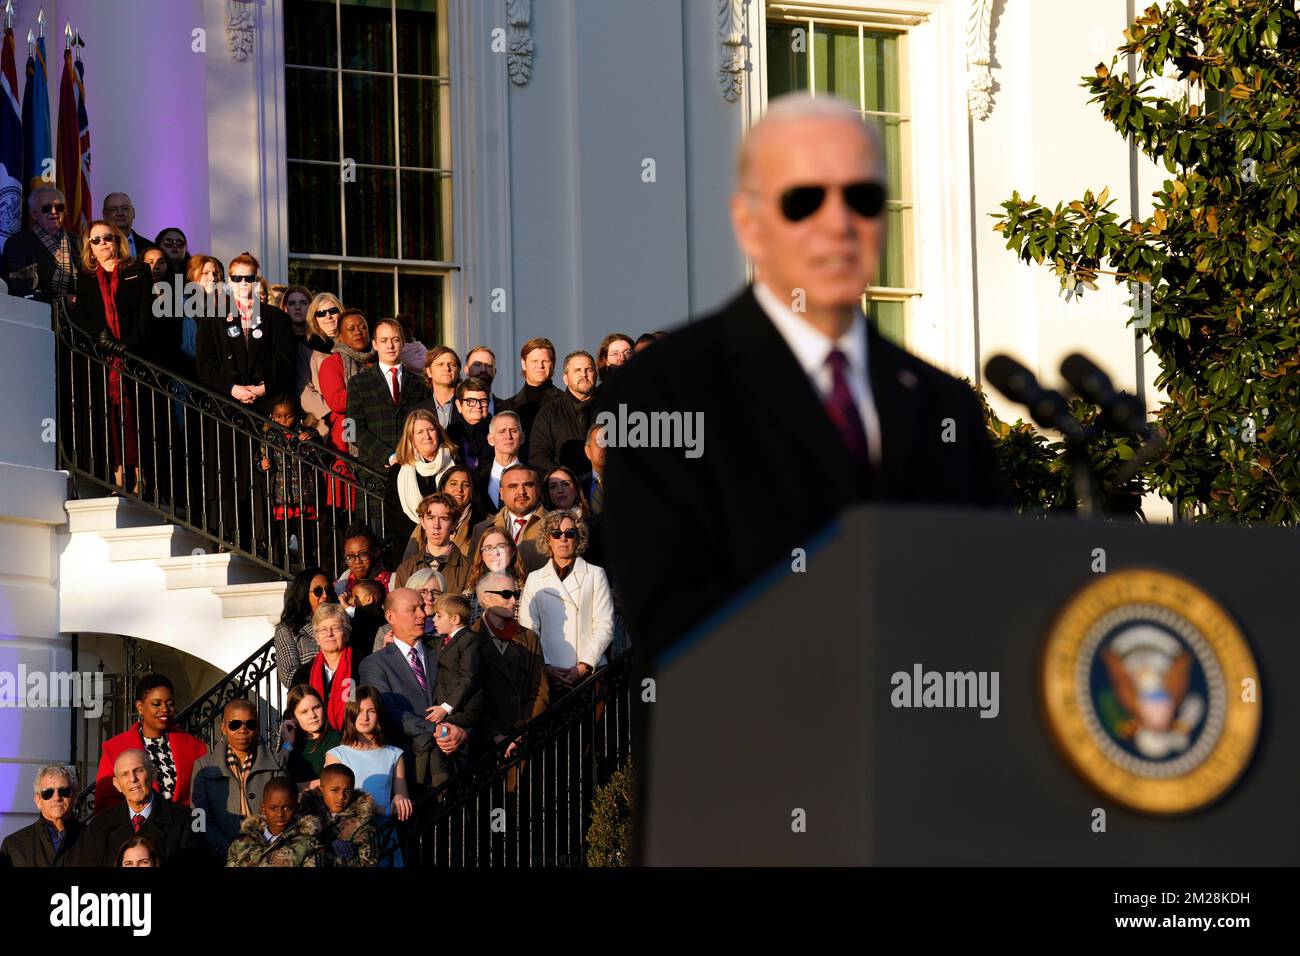 Invited guests look on as United States President Joe Biden hosts a ceremony to sign the Respect for Marriage Act on the the South Lawn of the White House in Washington, DC on December 13, 2022. Credit: Yuri Gripas/Pool via CNP Stock Photo